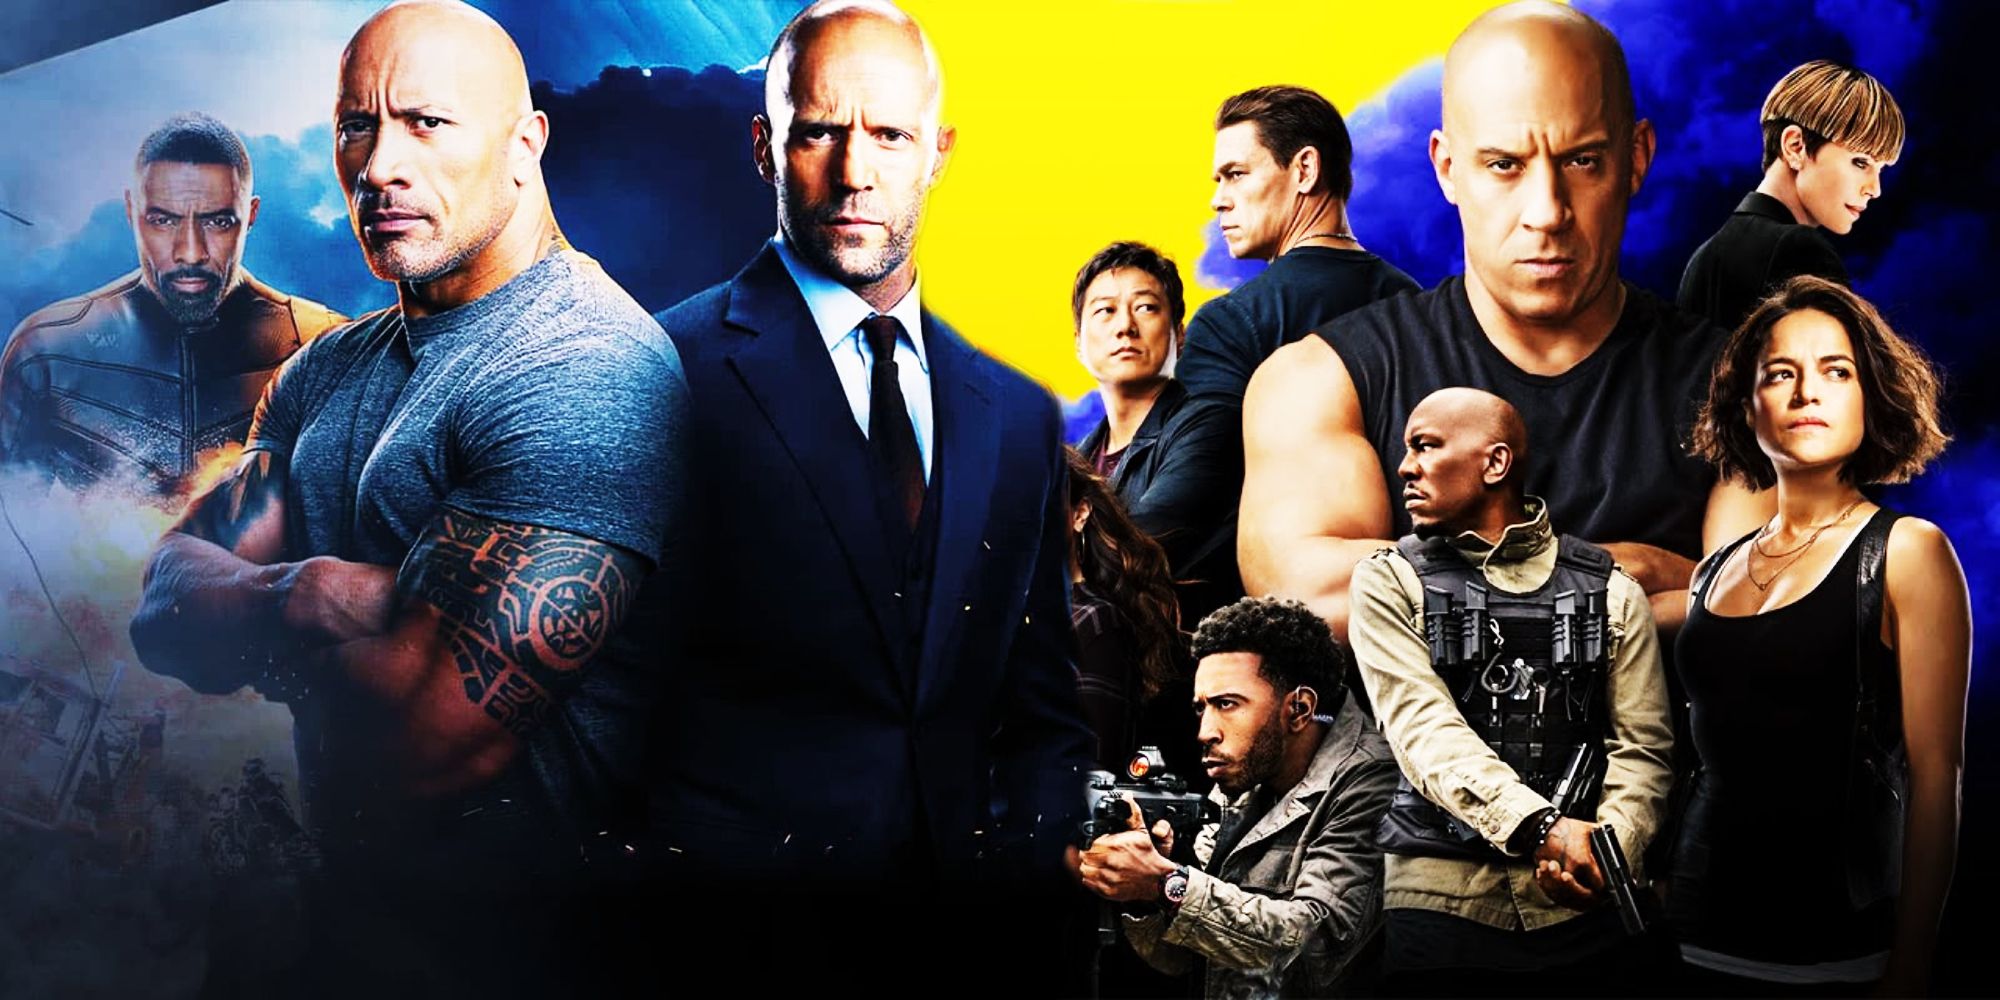 The posters for Hobbs & Shaw and F9 combined